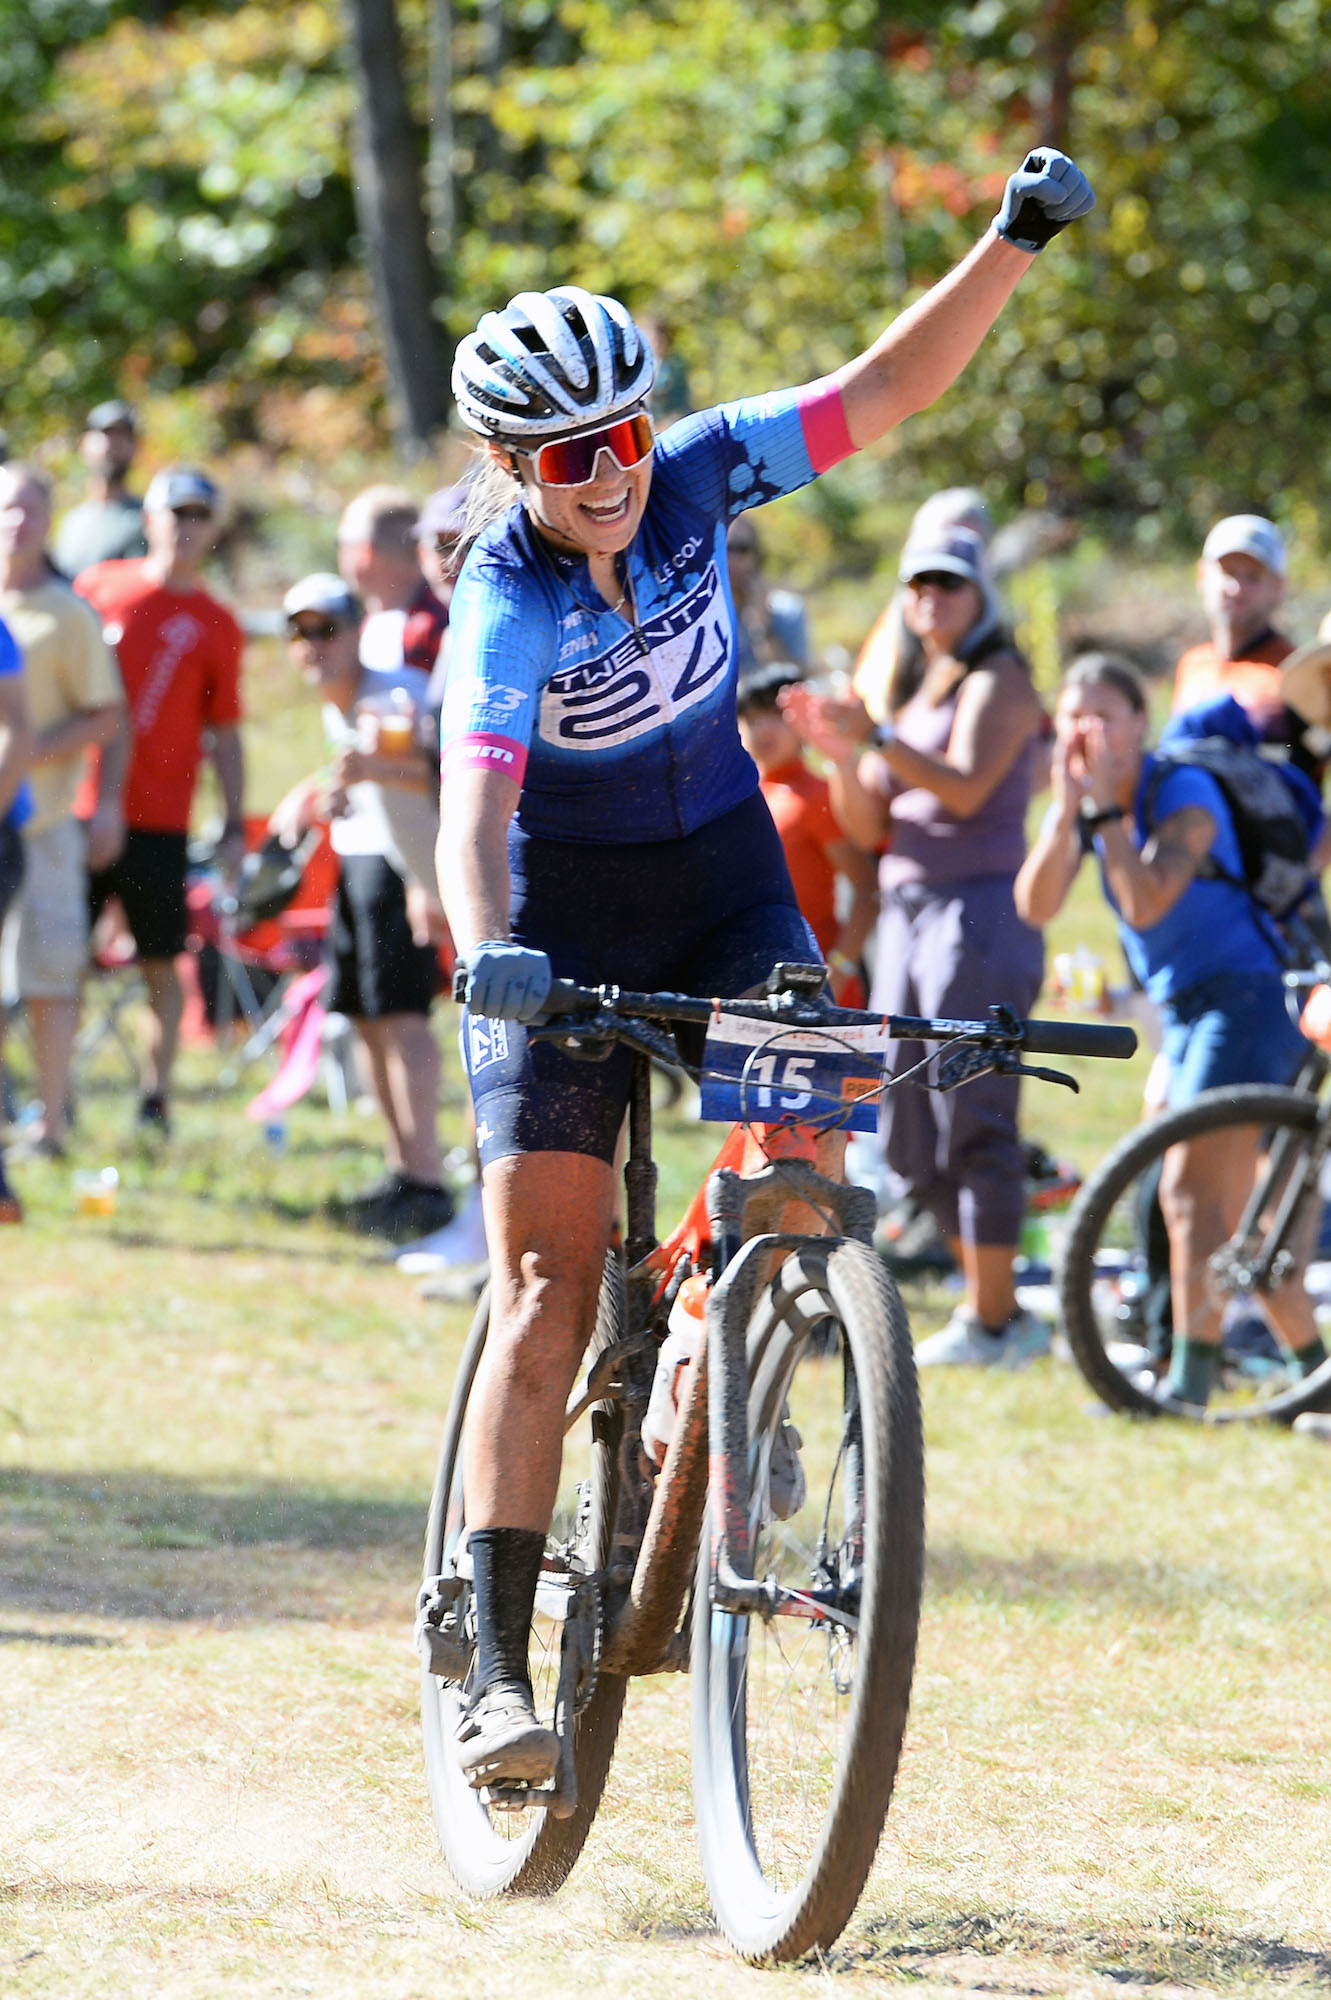 Melisa Rollins celebrates her win at the 38th Annual Chequamegon MTB Festival. Photo courtesy Life Time